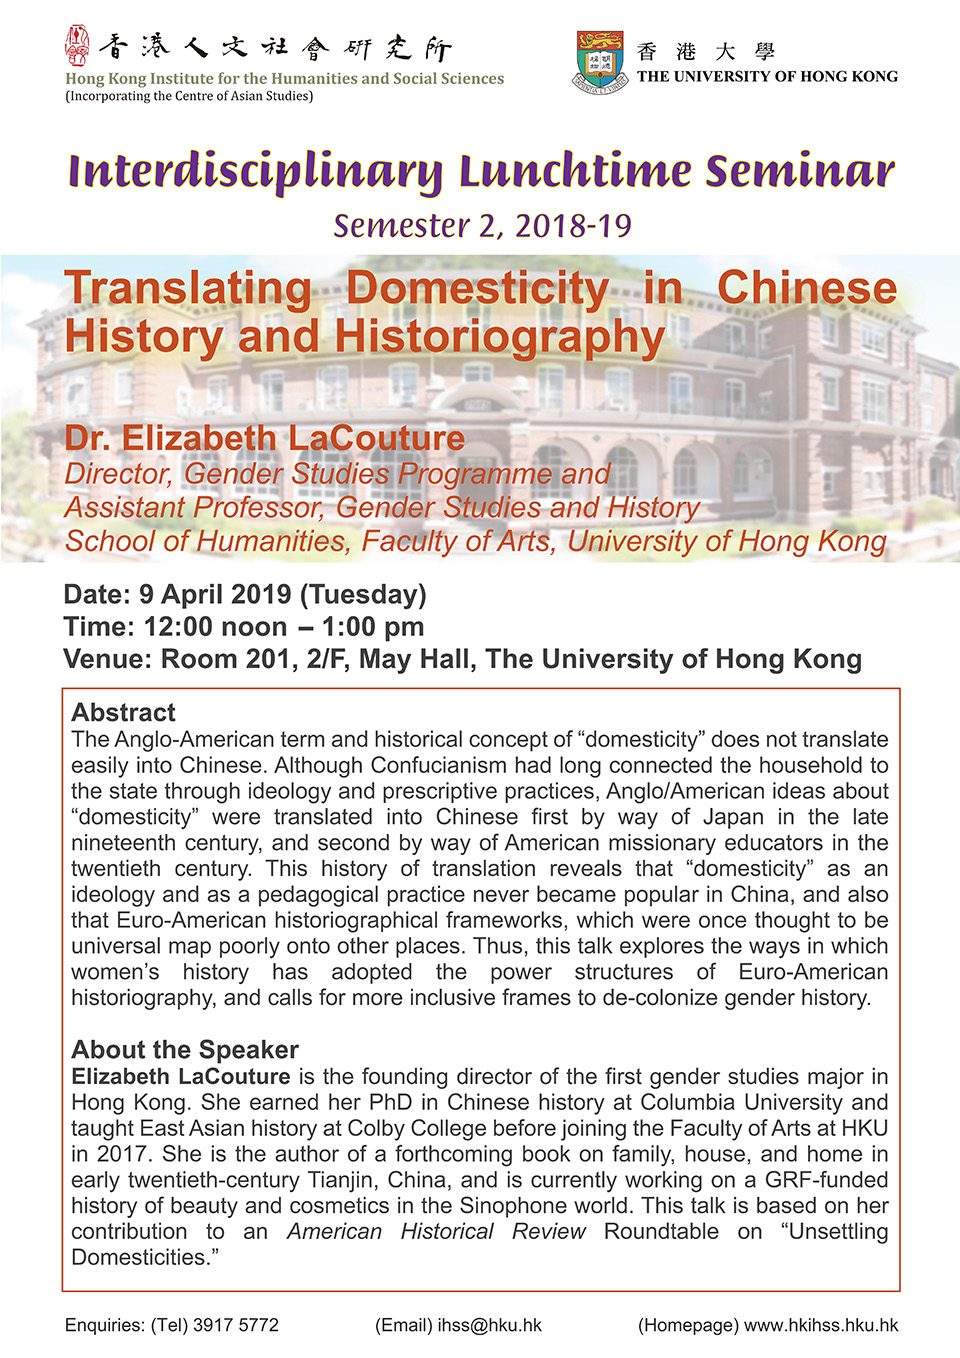 Interdisciplinary Lunchtime Seminar on “Translating Domesticity in Chinese History and Historiography” by Dr. Elizabeth LaCouture (April 9, 2019)